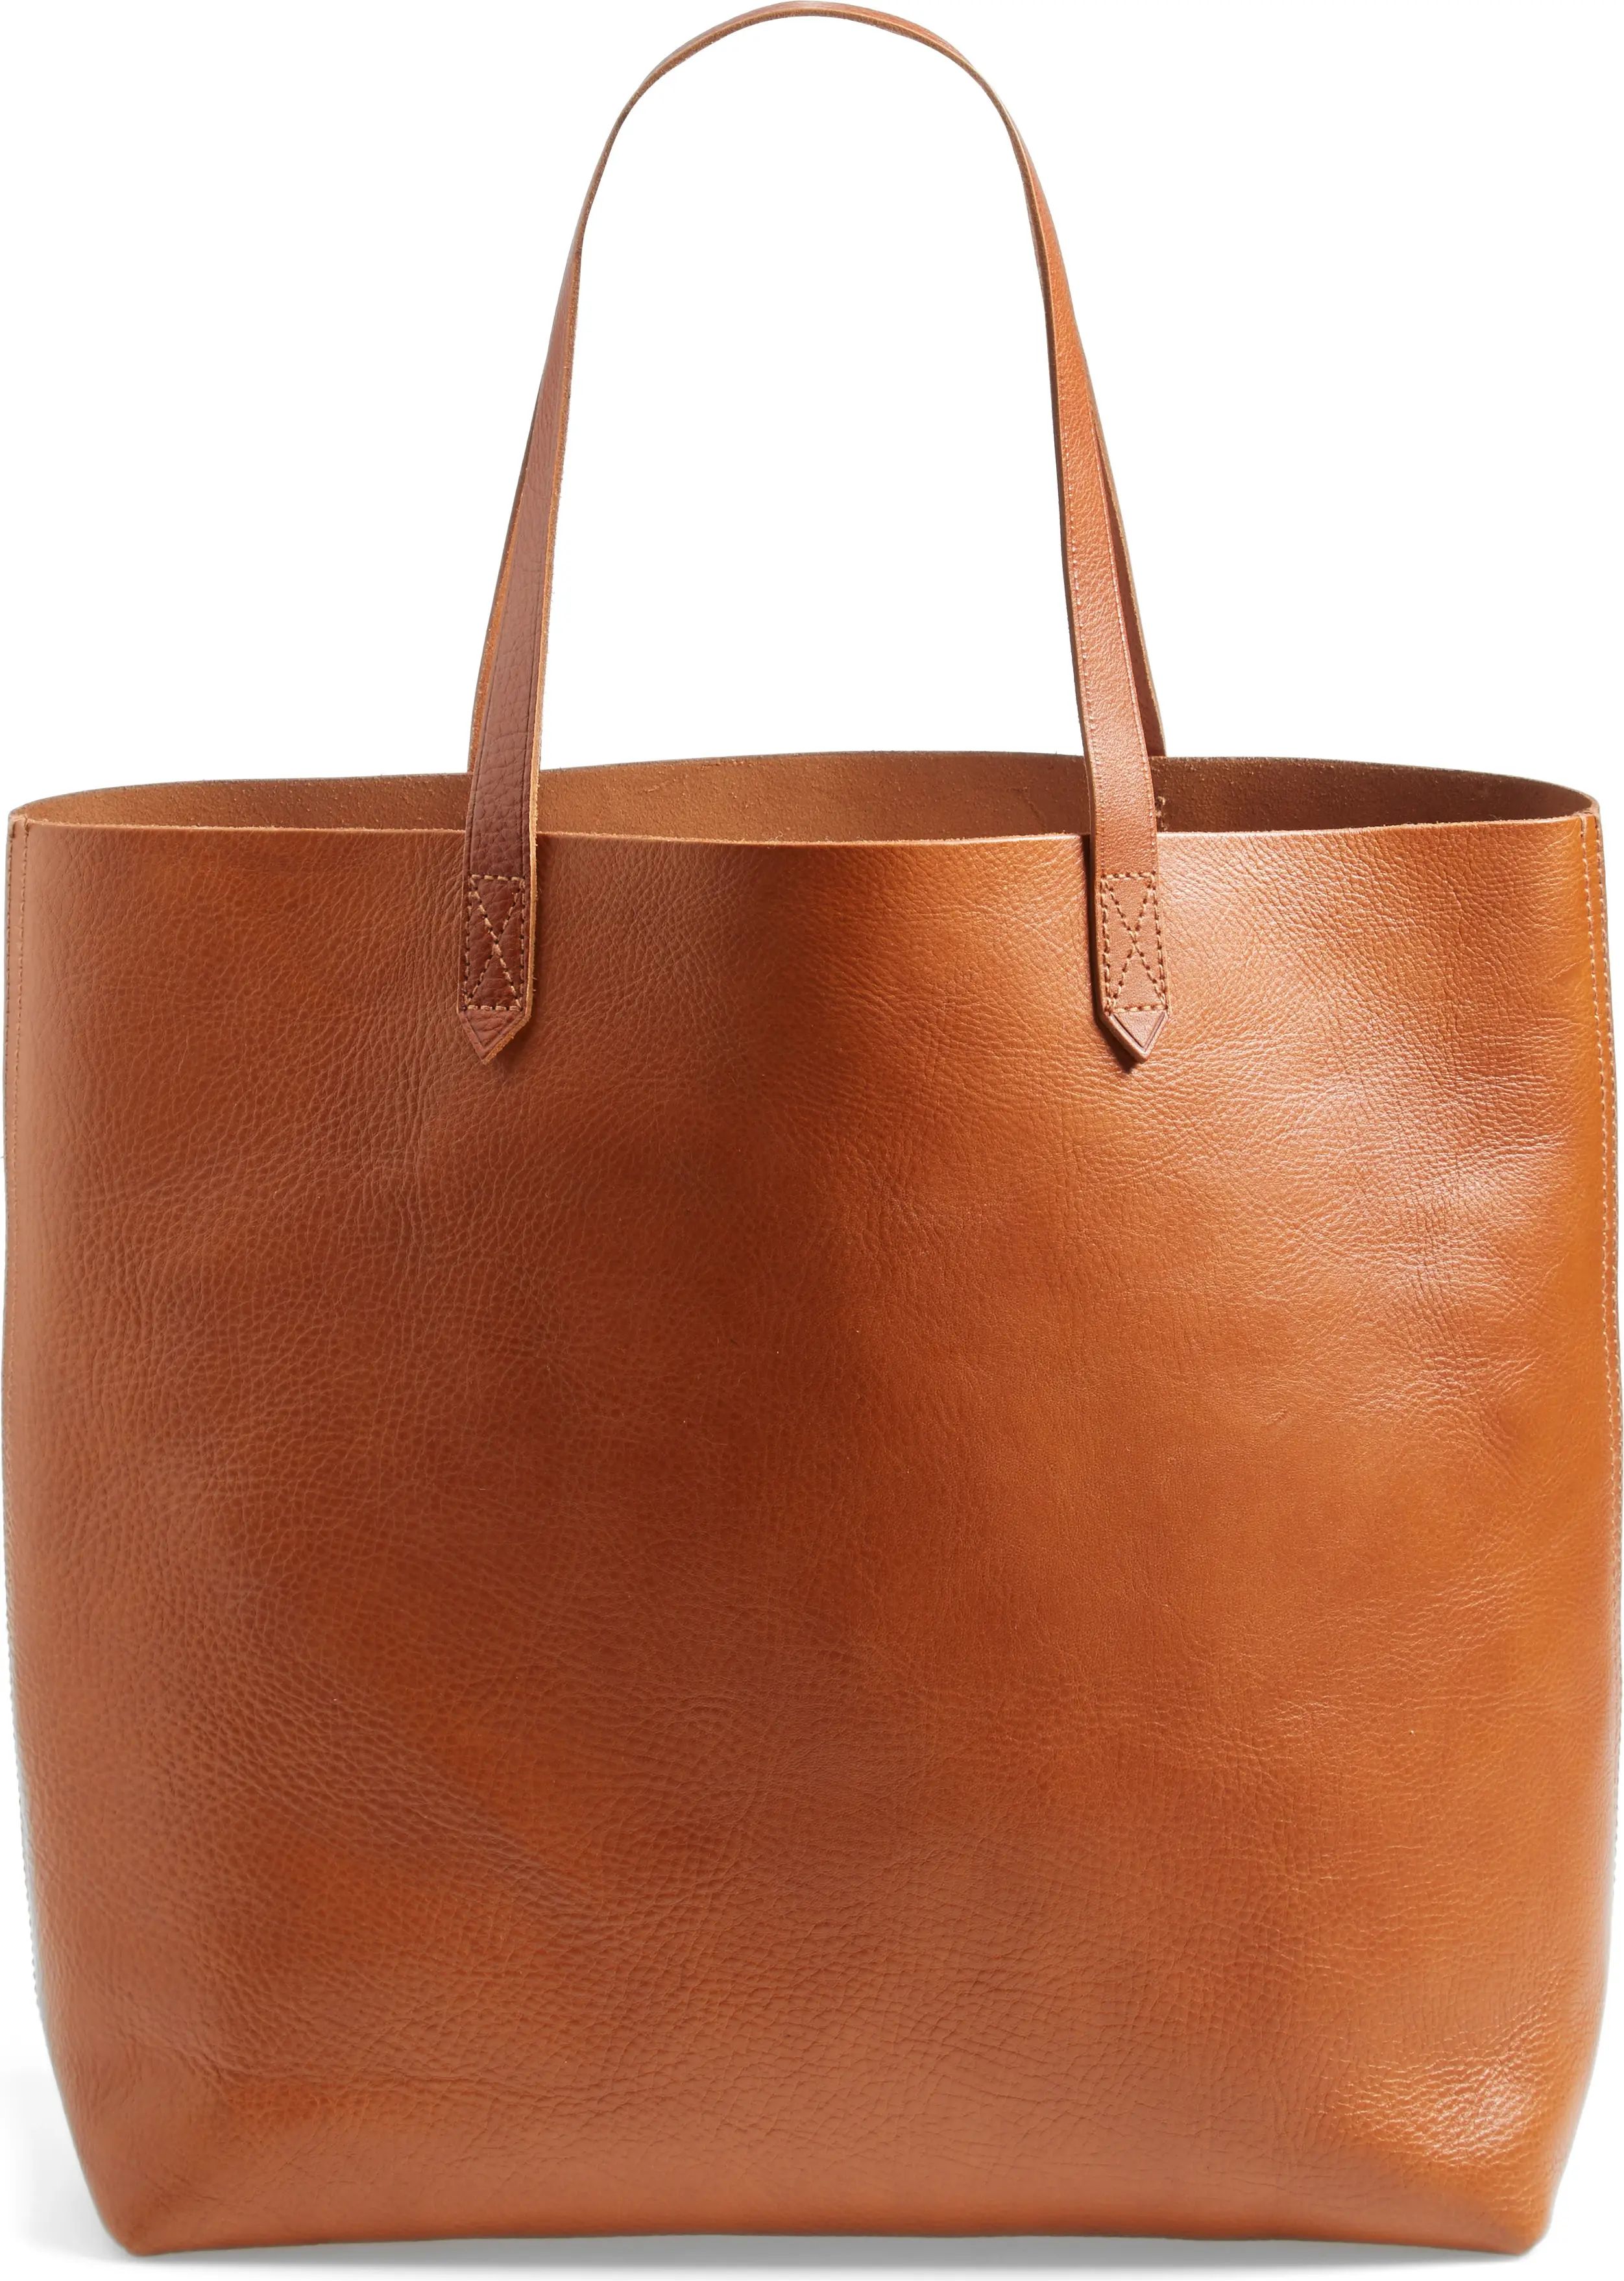 Madewell 'The Transport' Leather Tote | Nordstrom